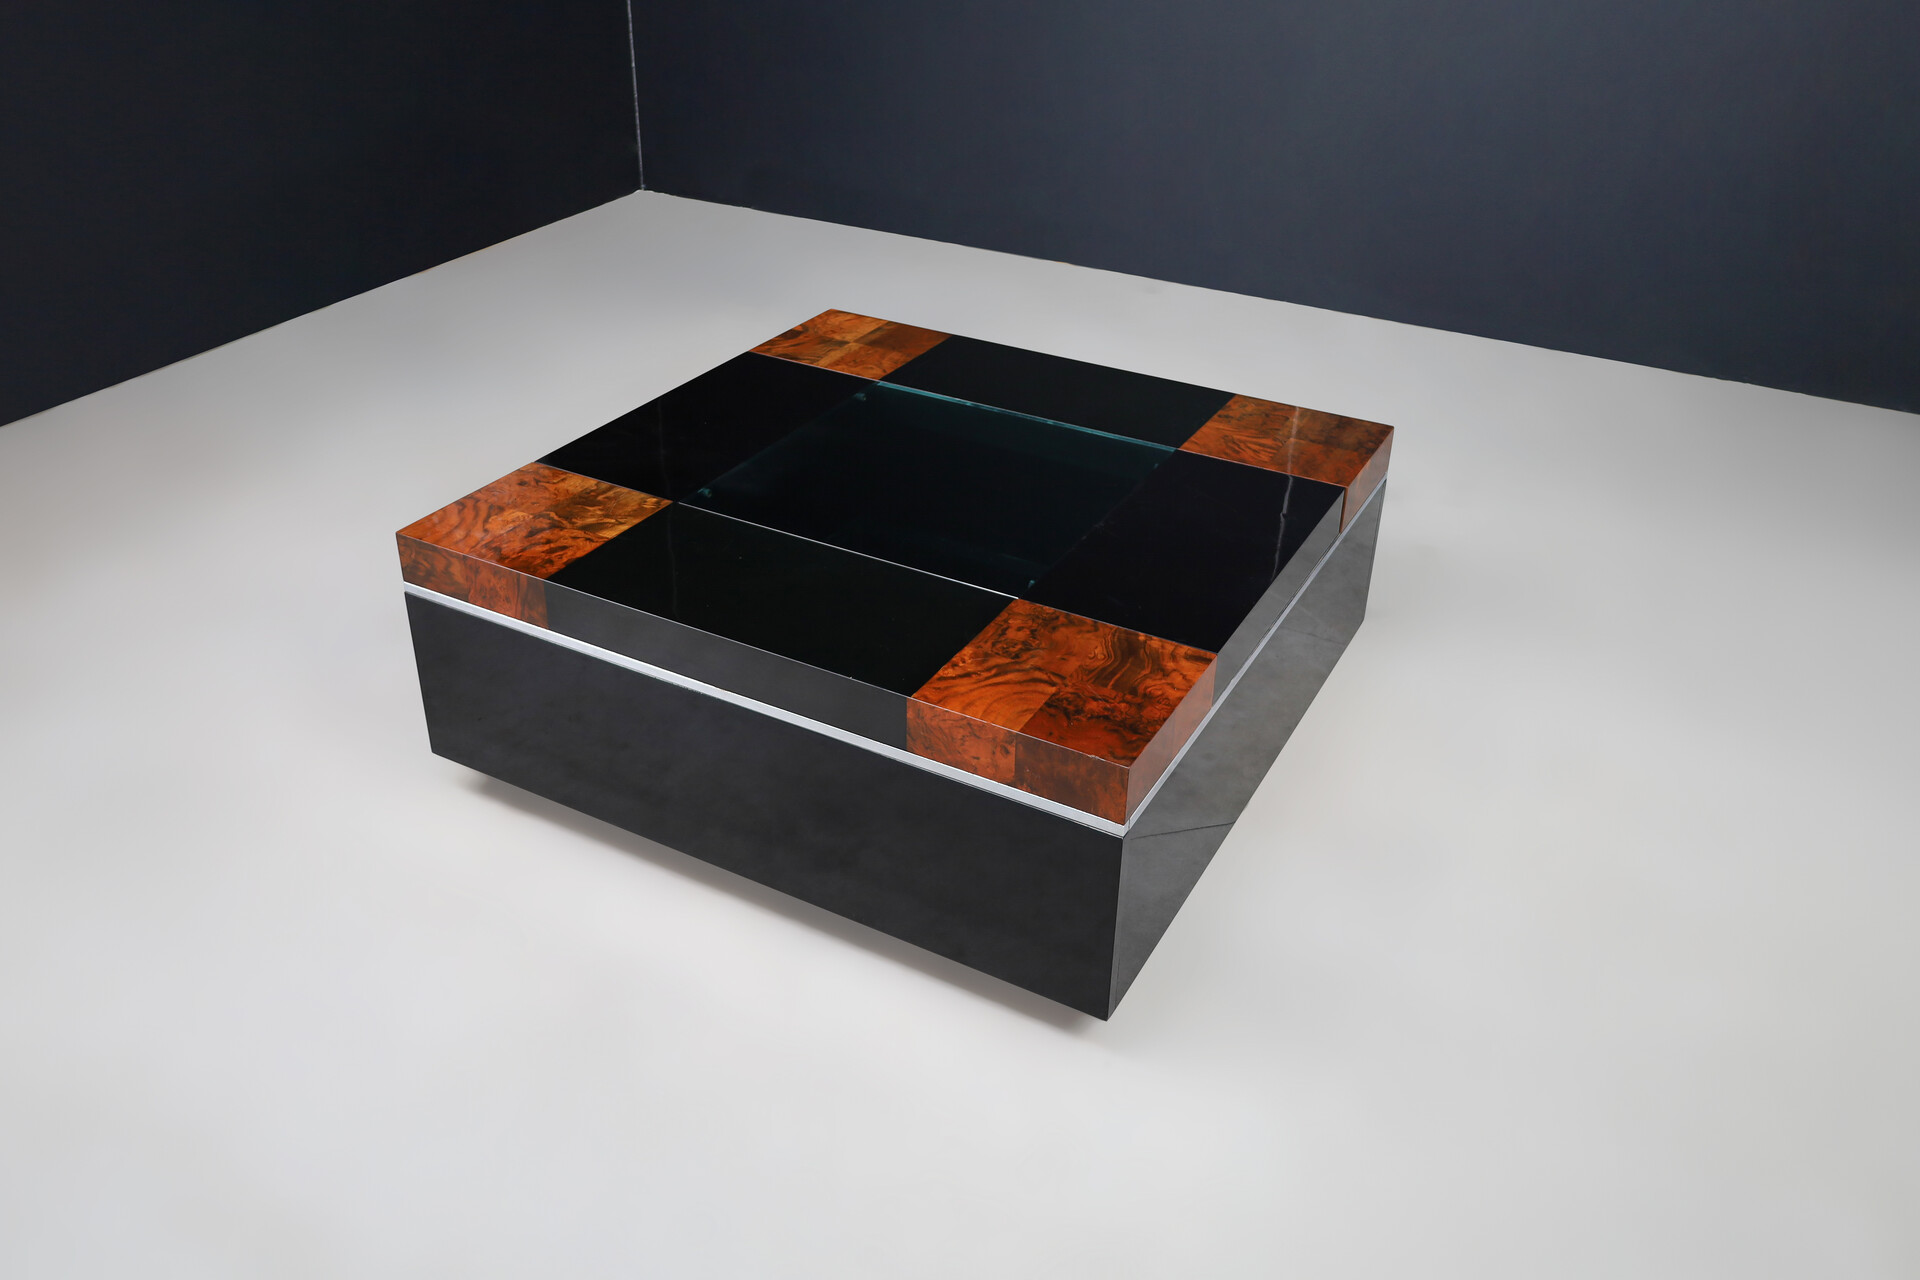 Mid century modern Willy Rizzo Lacquered and Glass Coffee Table Bar, for Sabot, circa 1970 Late-20th century